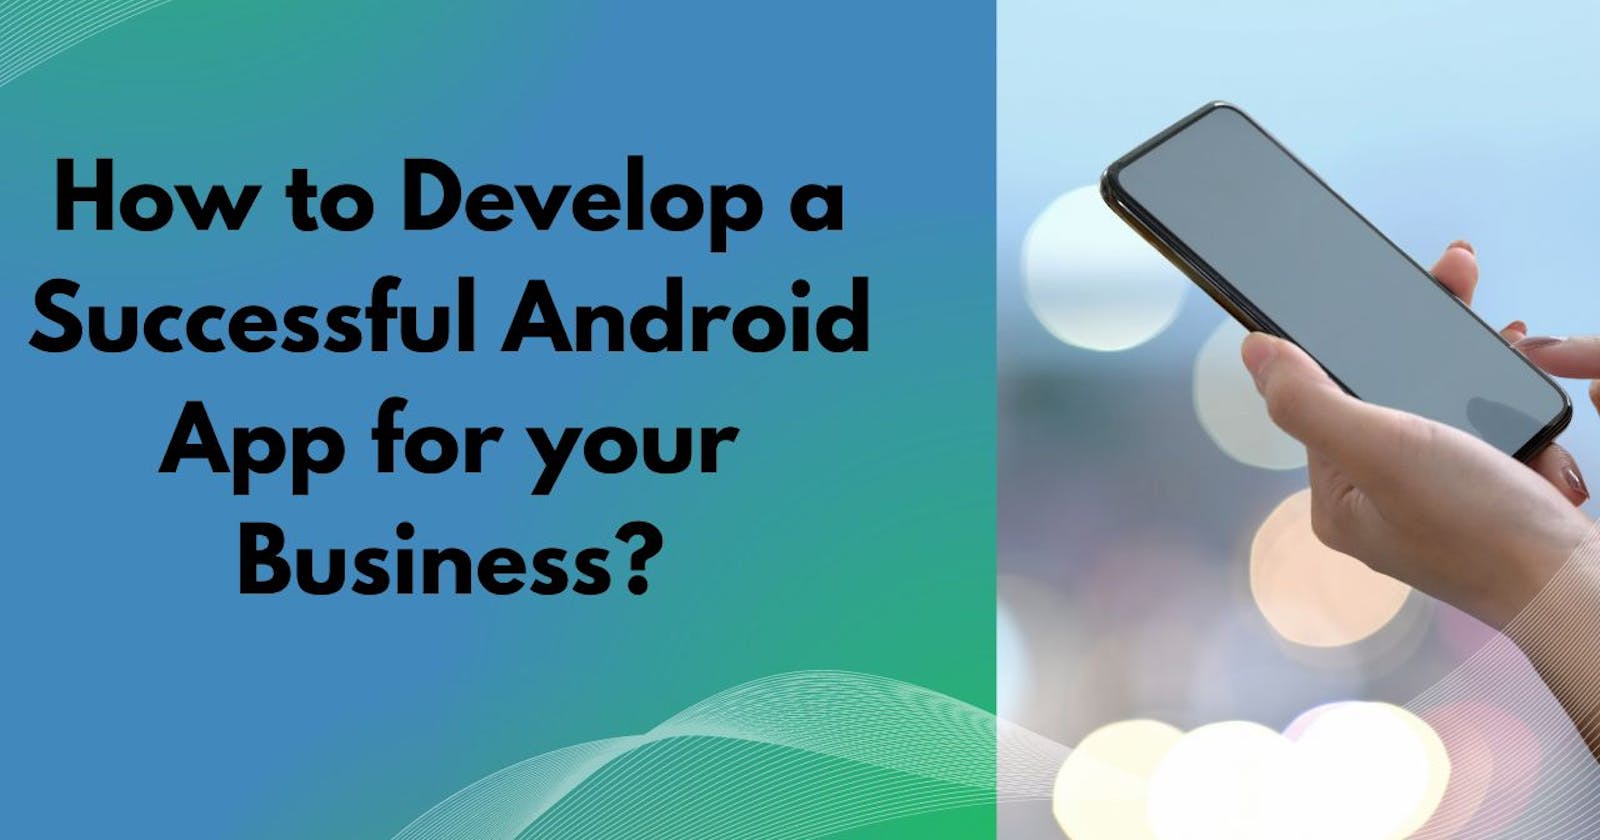 How to Develop a Successful Android App for your Business?